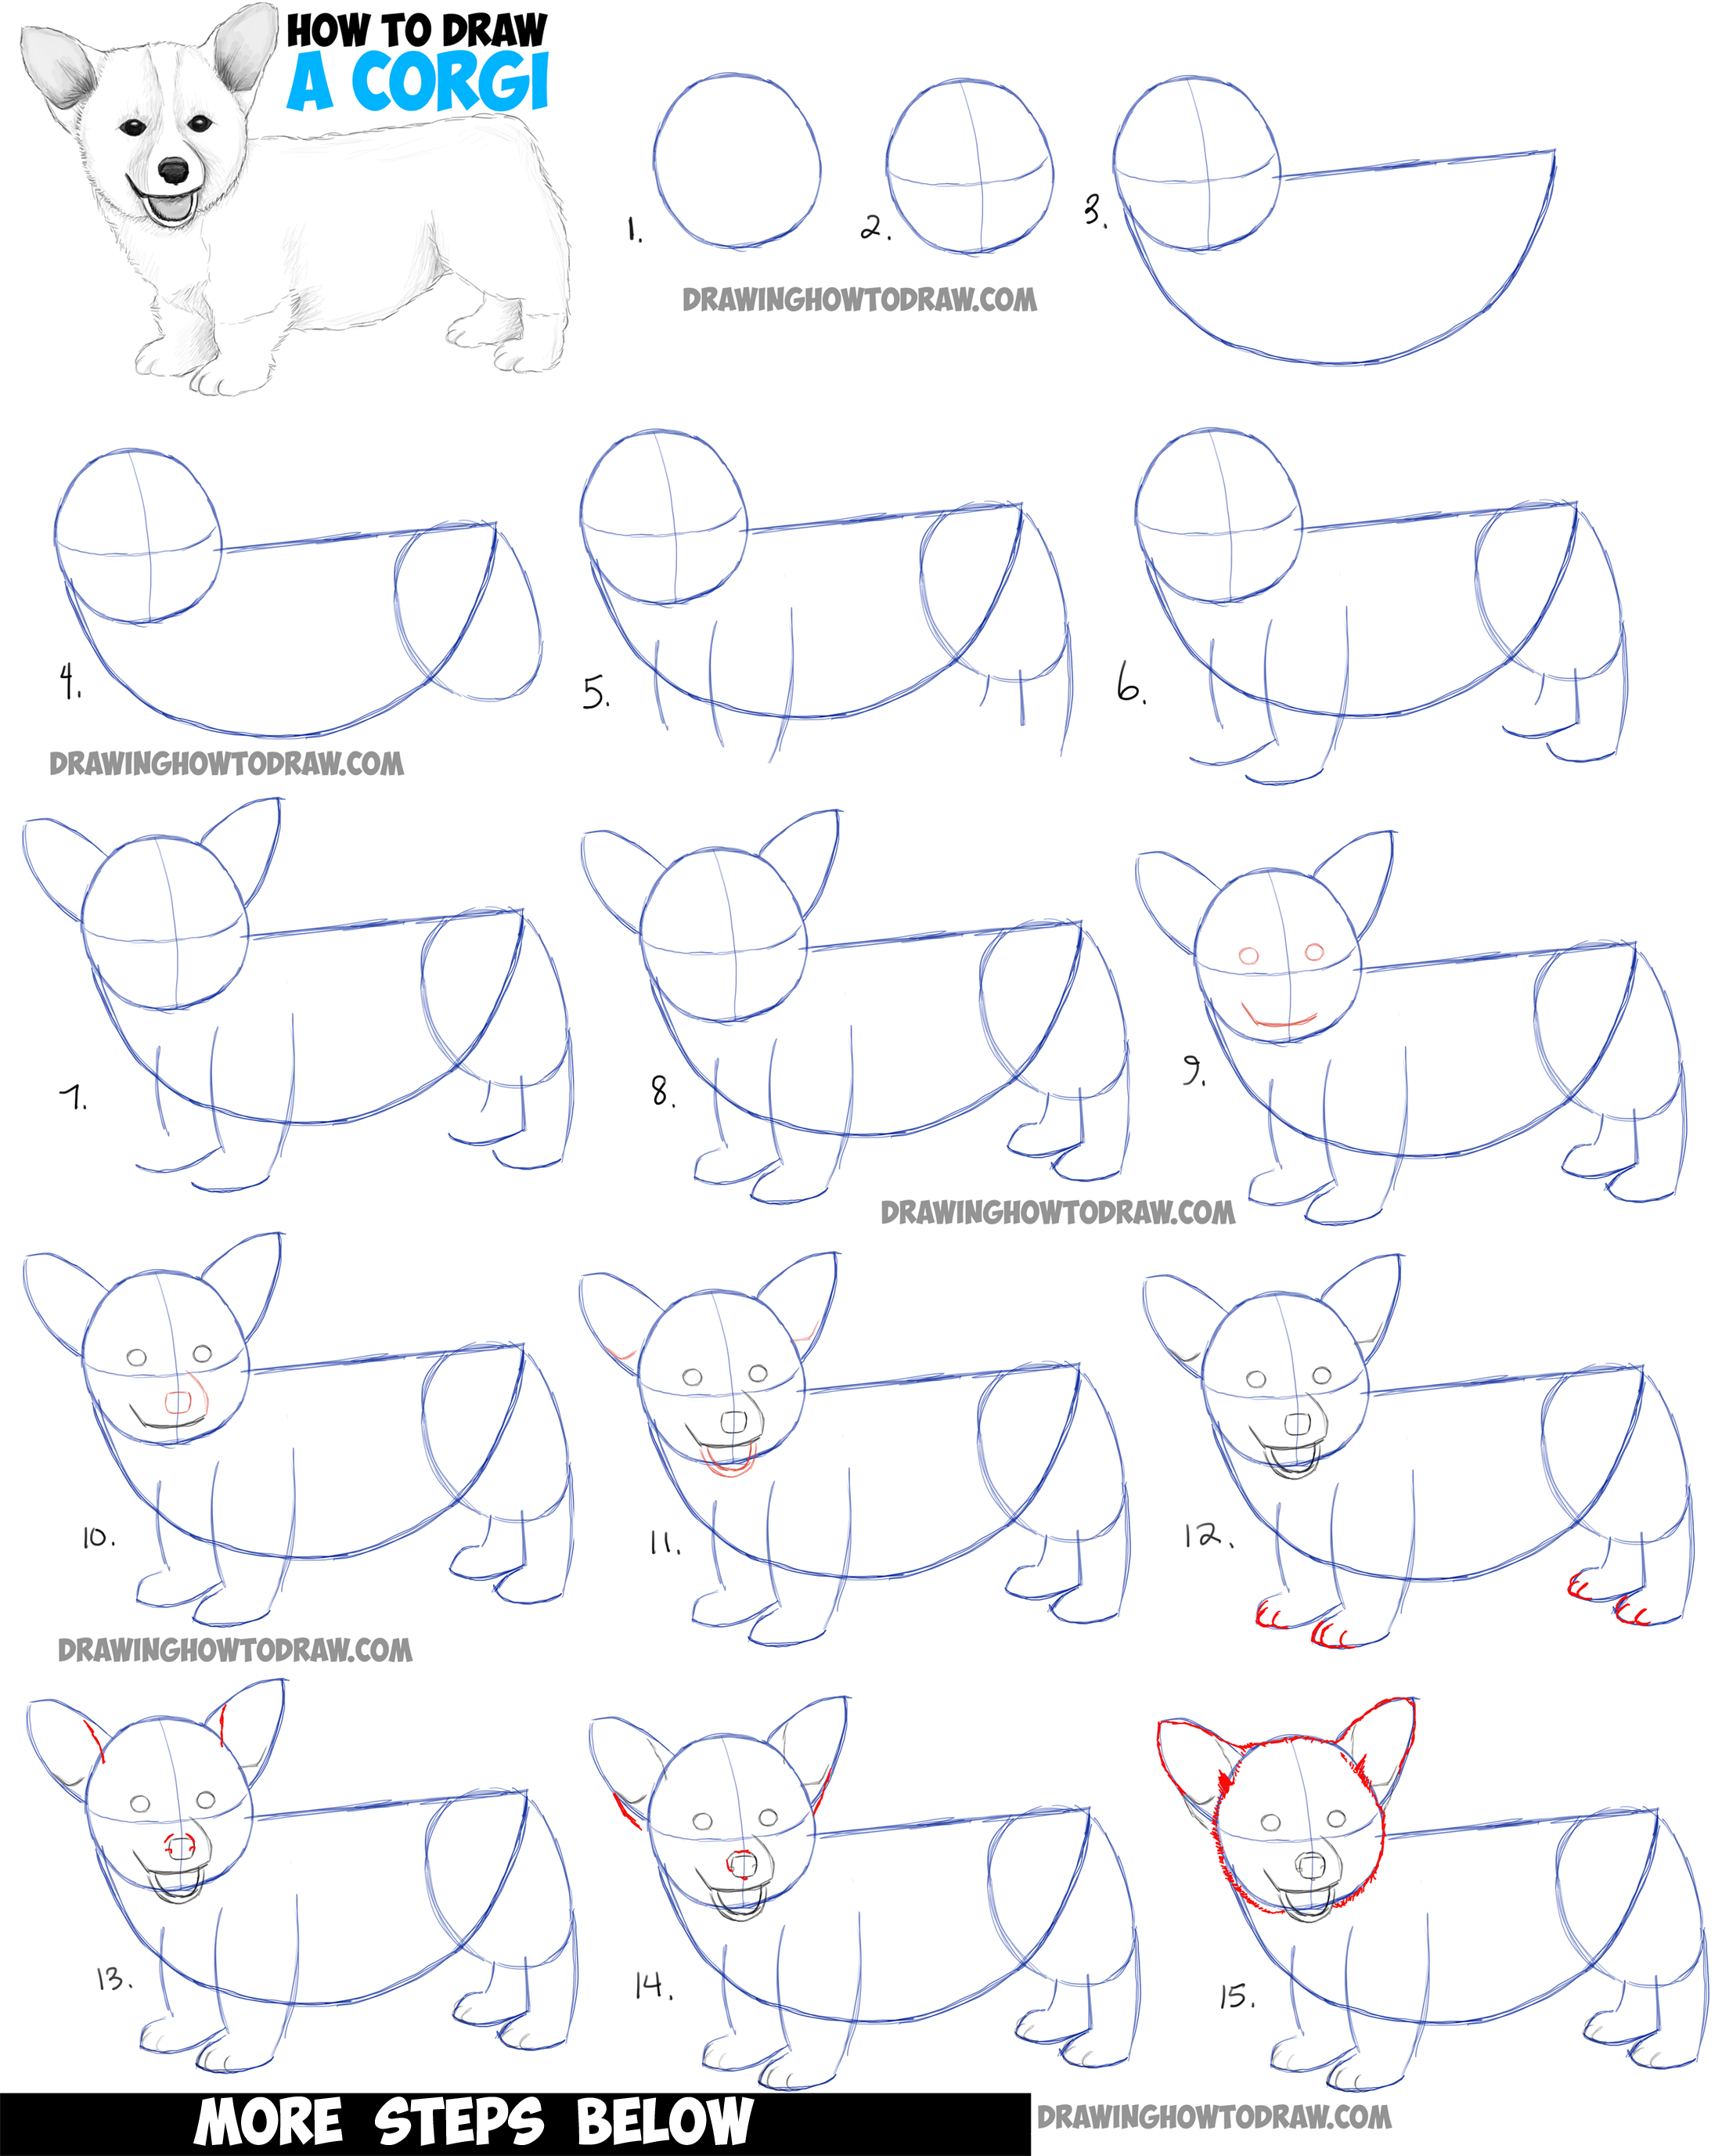 How to Draw a Corgi Puppy Easy Step by Step Realistic Drawing Tutorial